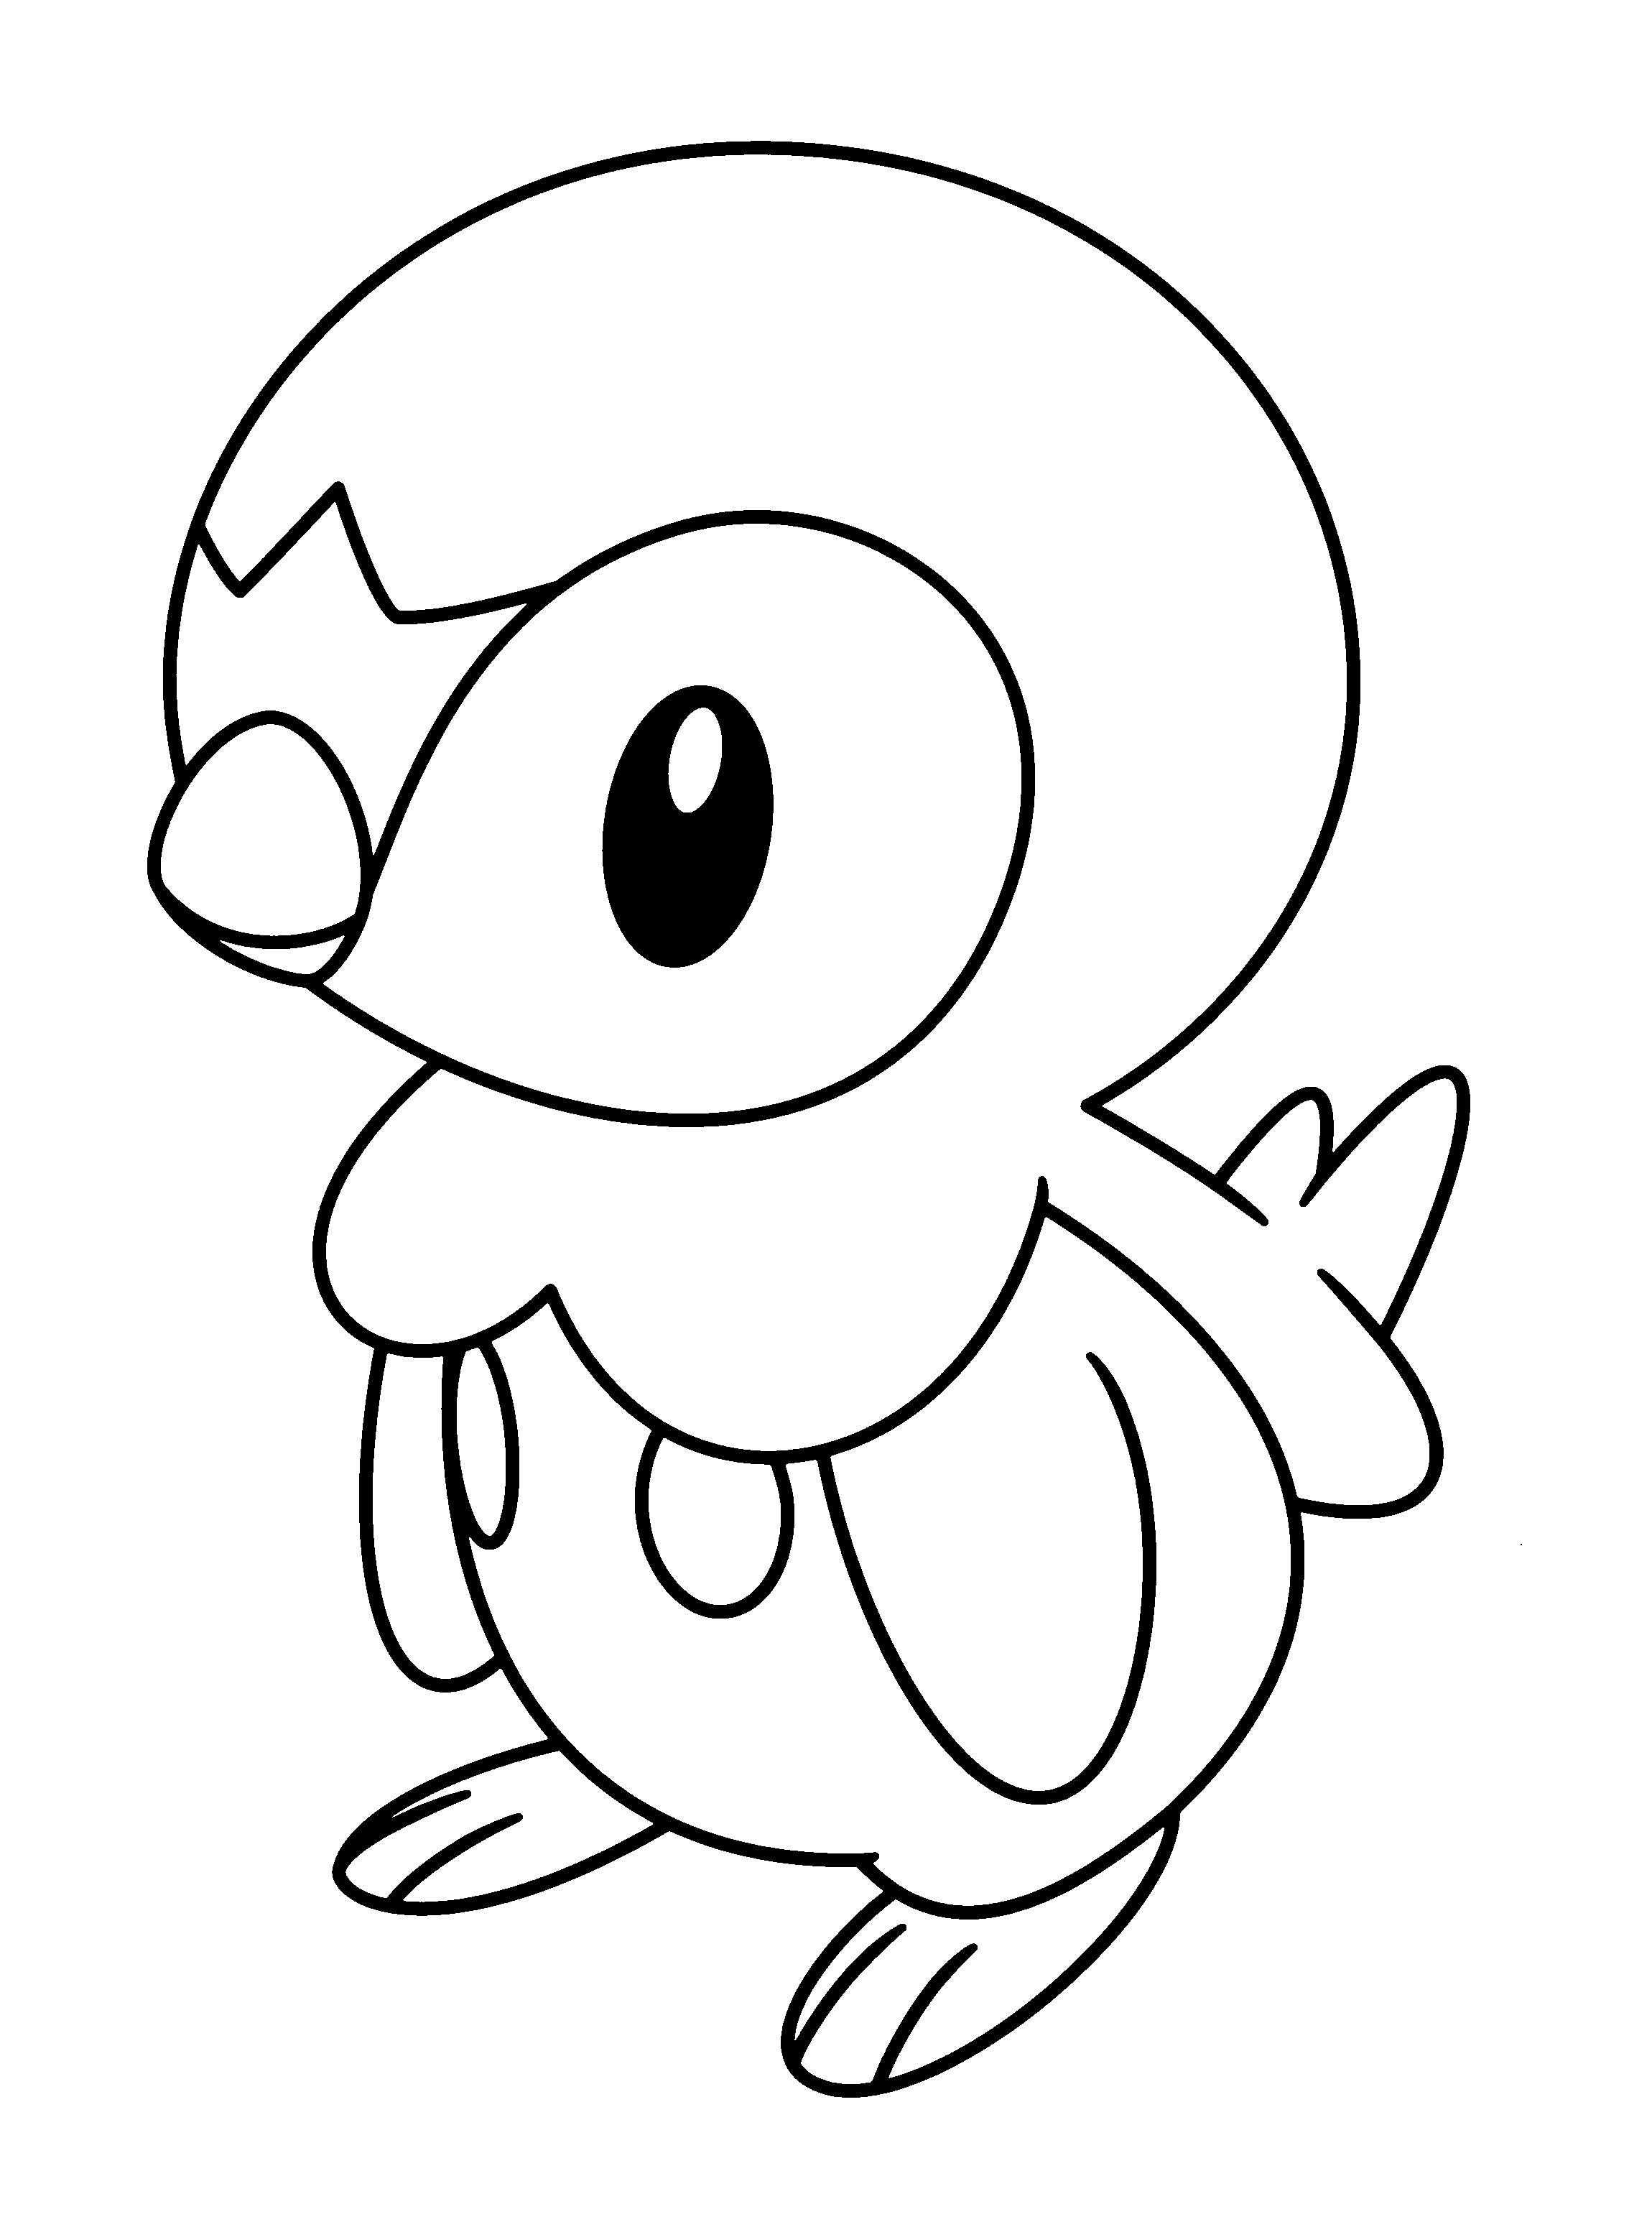 Pokemon coloring pages | Kids coloring pages | #35